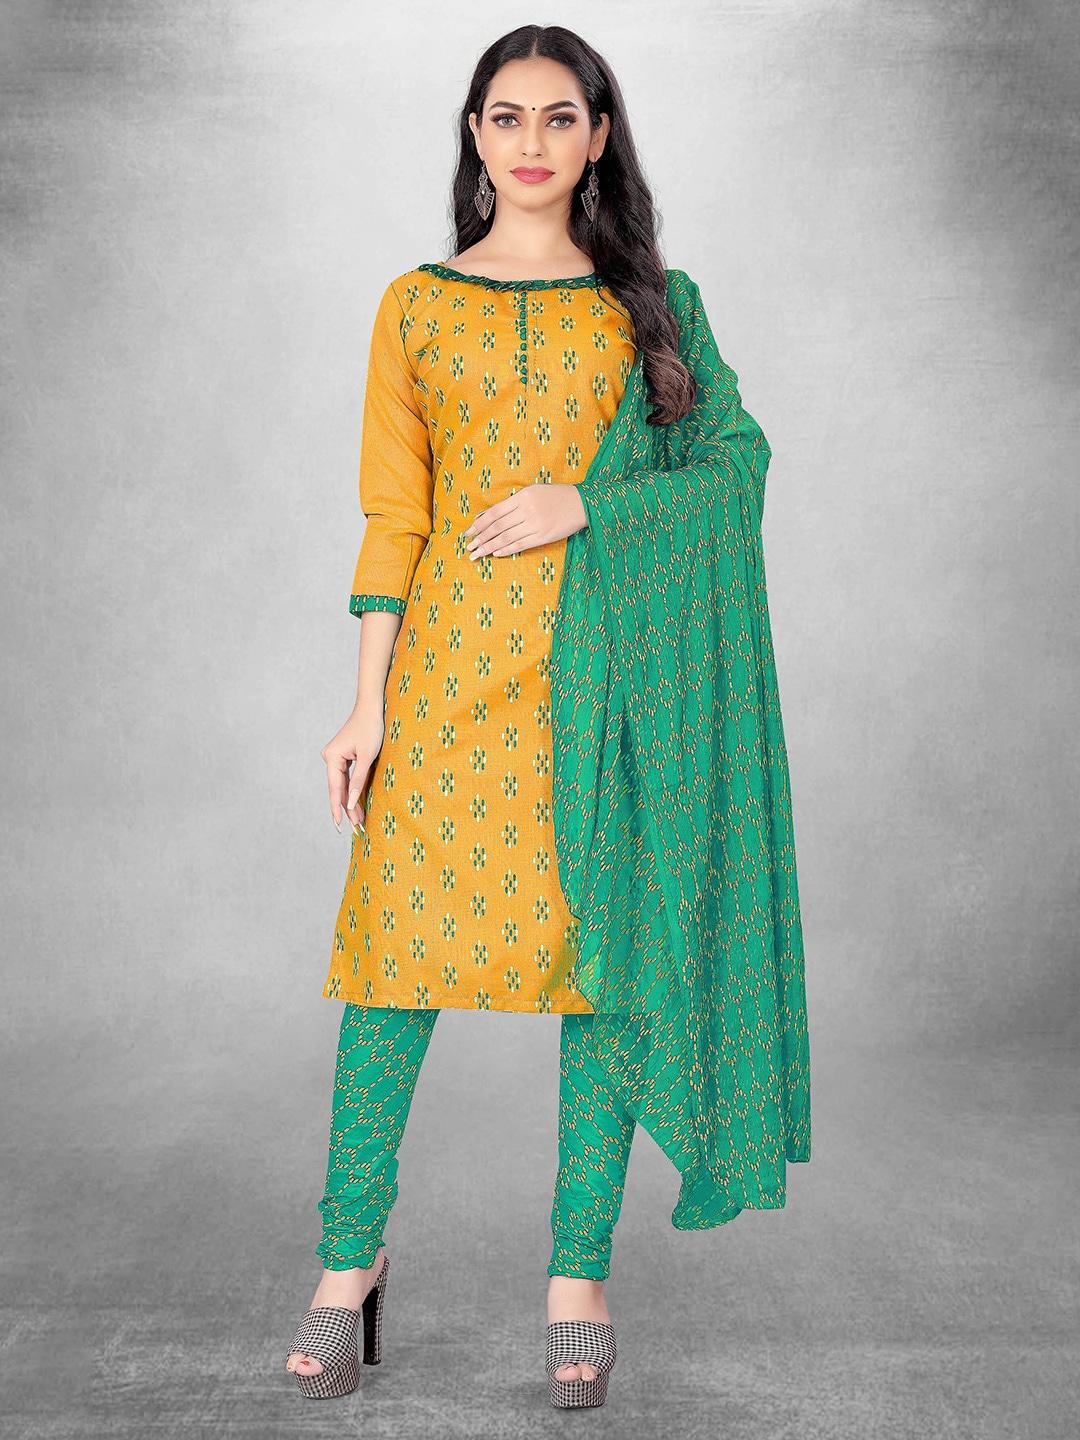 manvaa yellow printed unstitched dress material